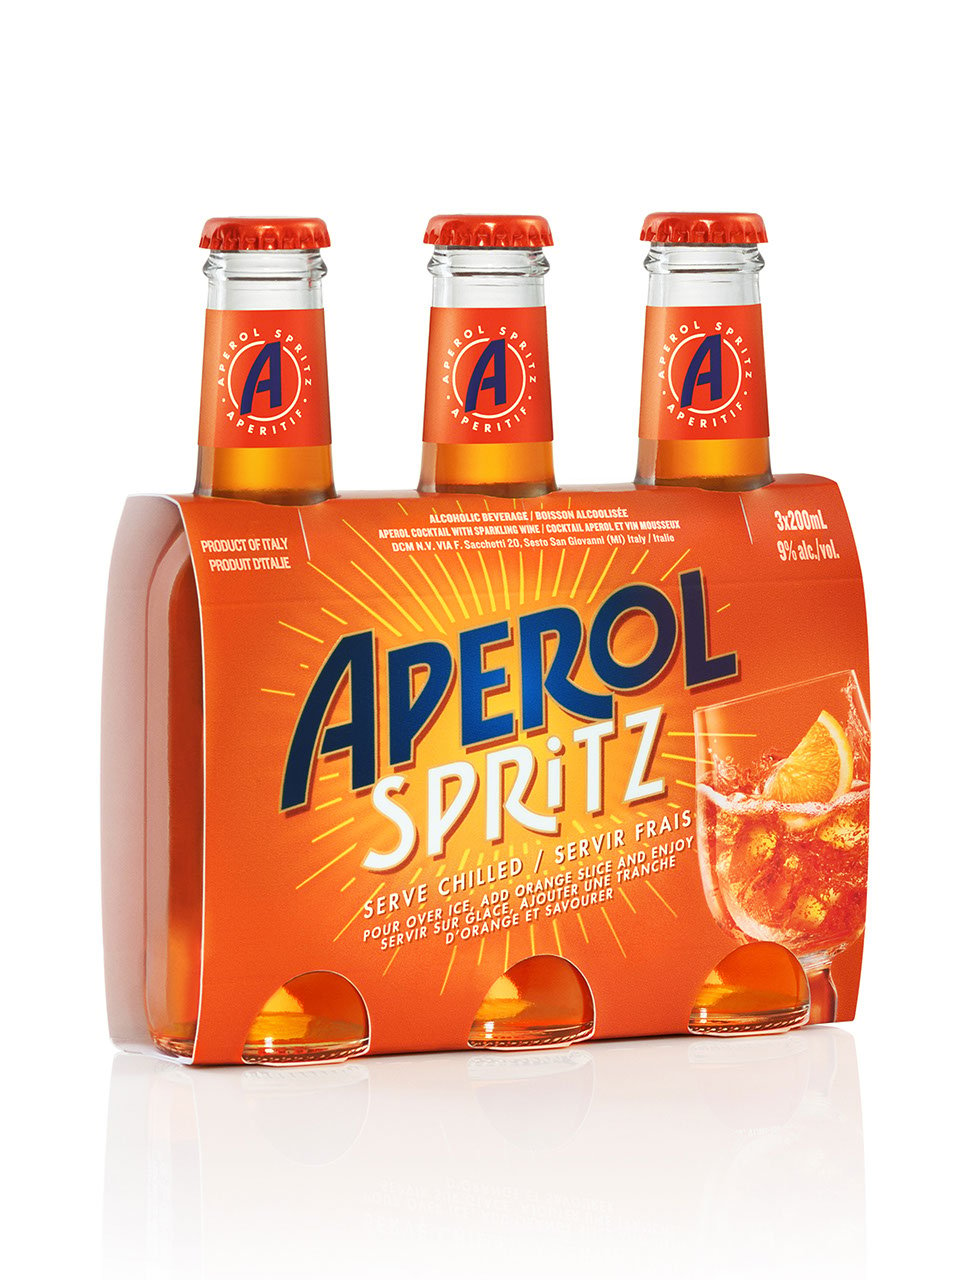 A three pack of bottled aperol spritz cocktails